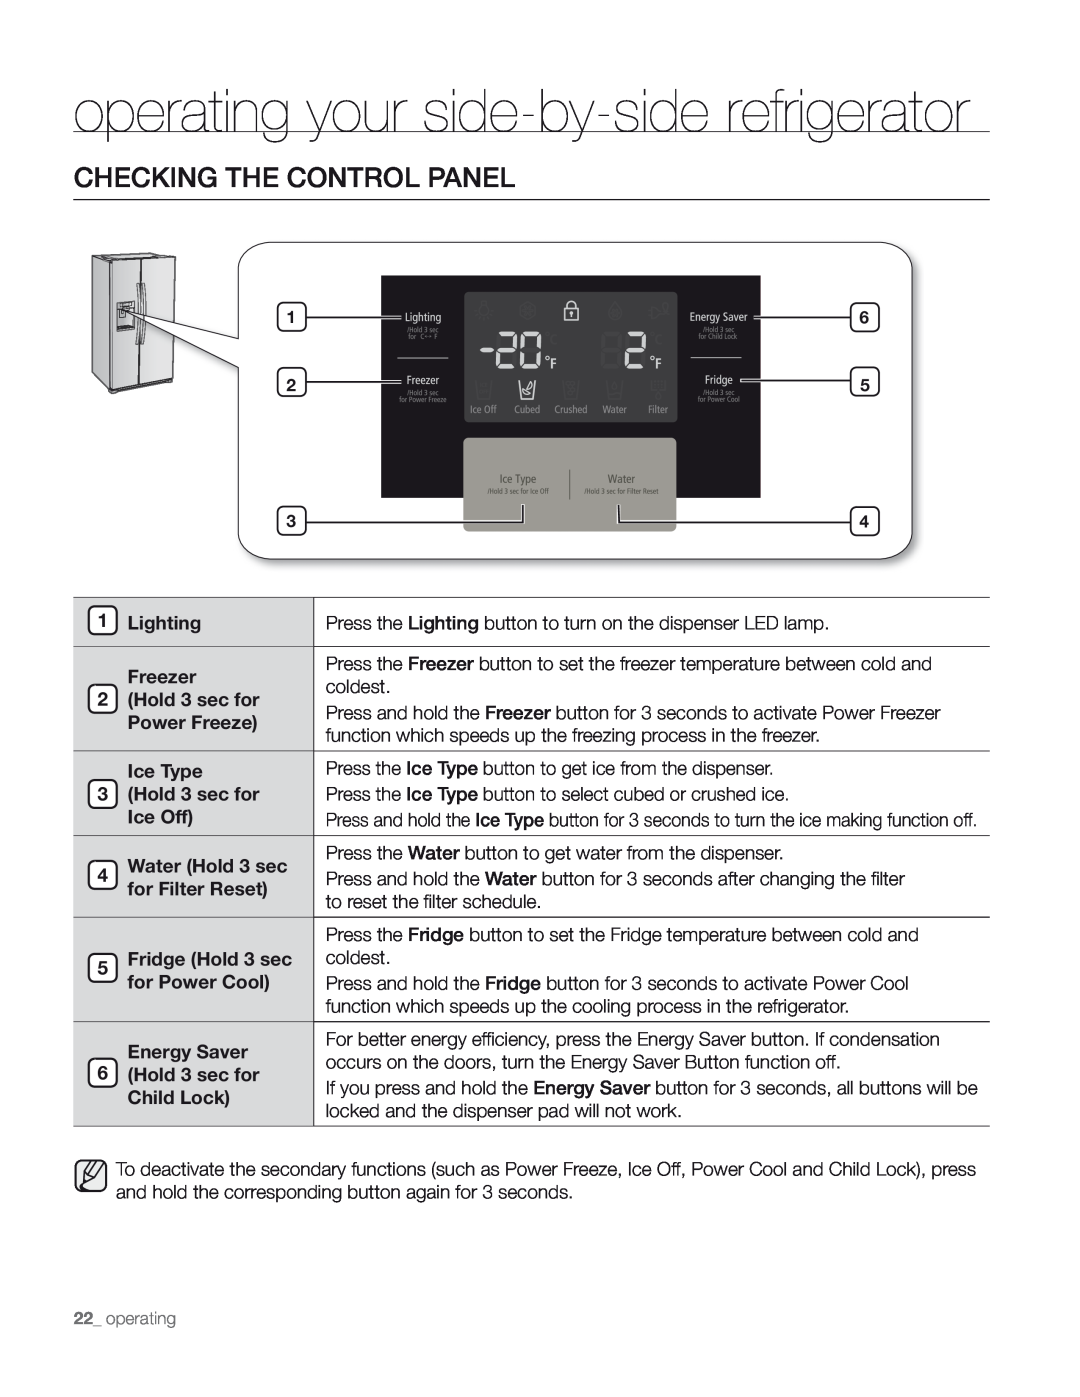 Samsung DA68-01890M user manual operating your side-by-side refrigerator, Checking The Control Panel 